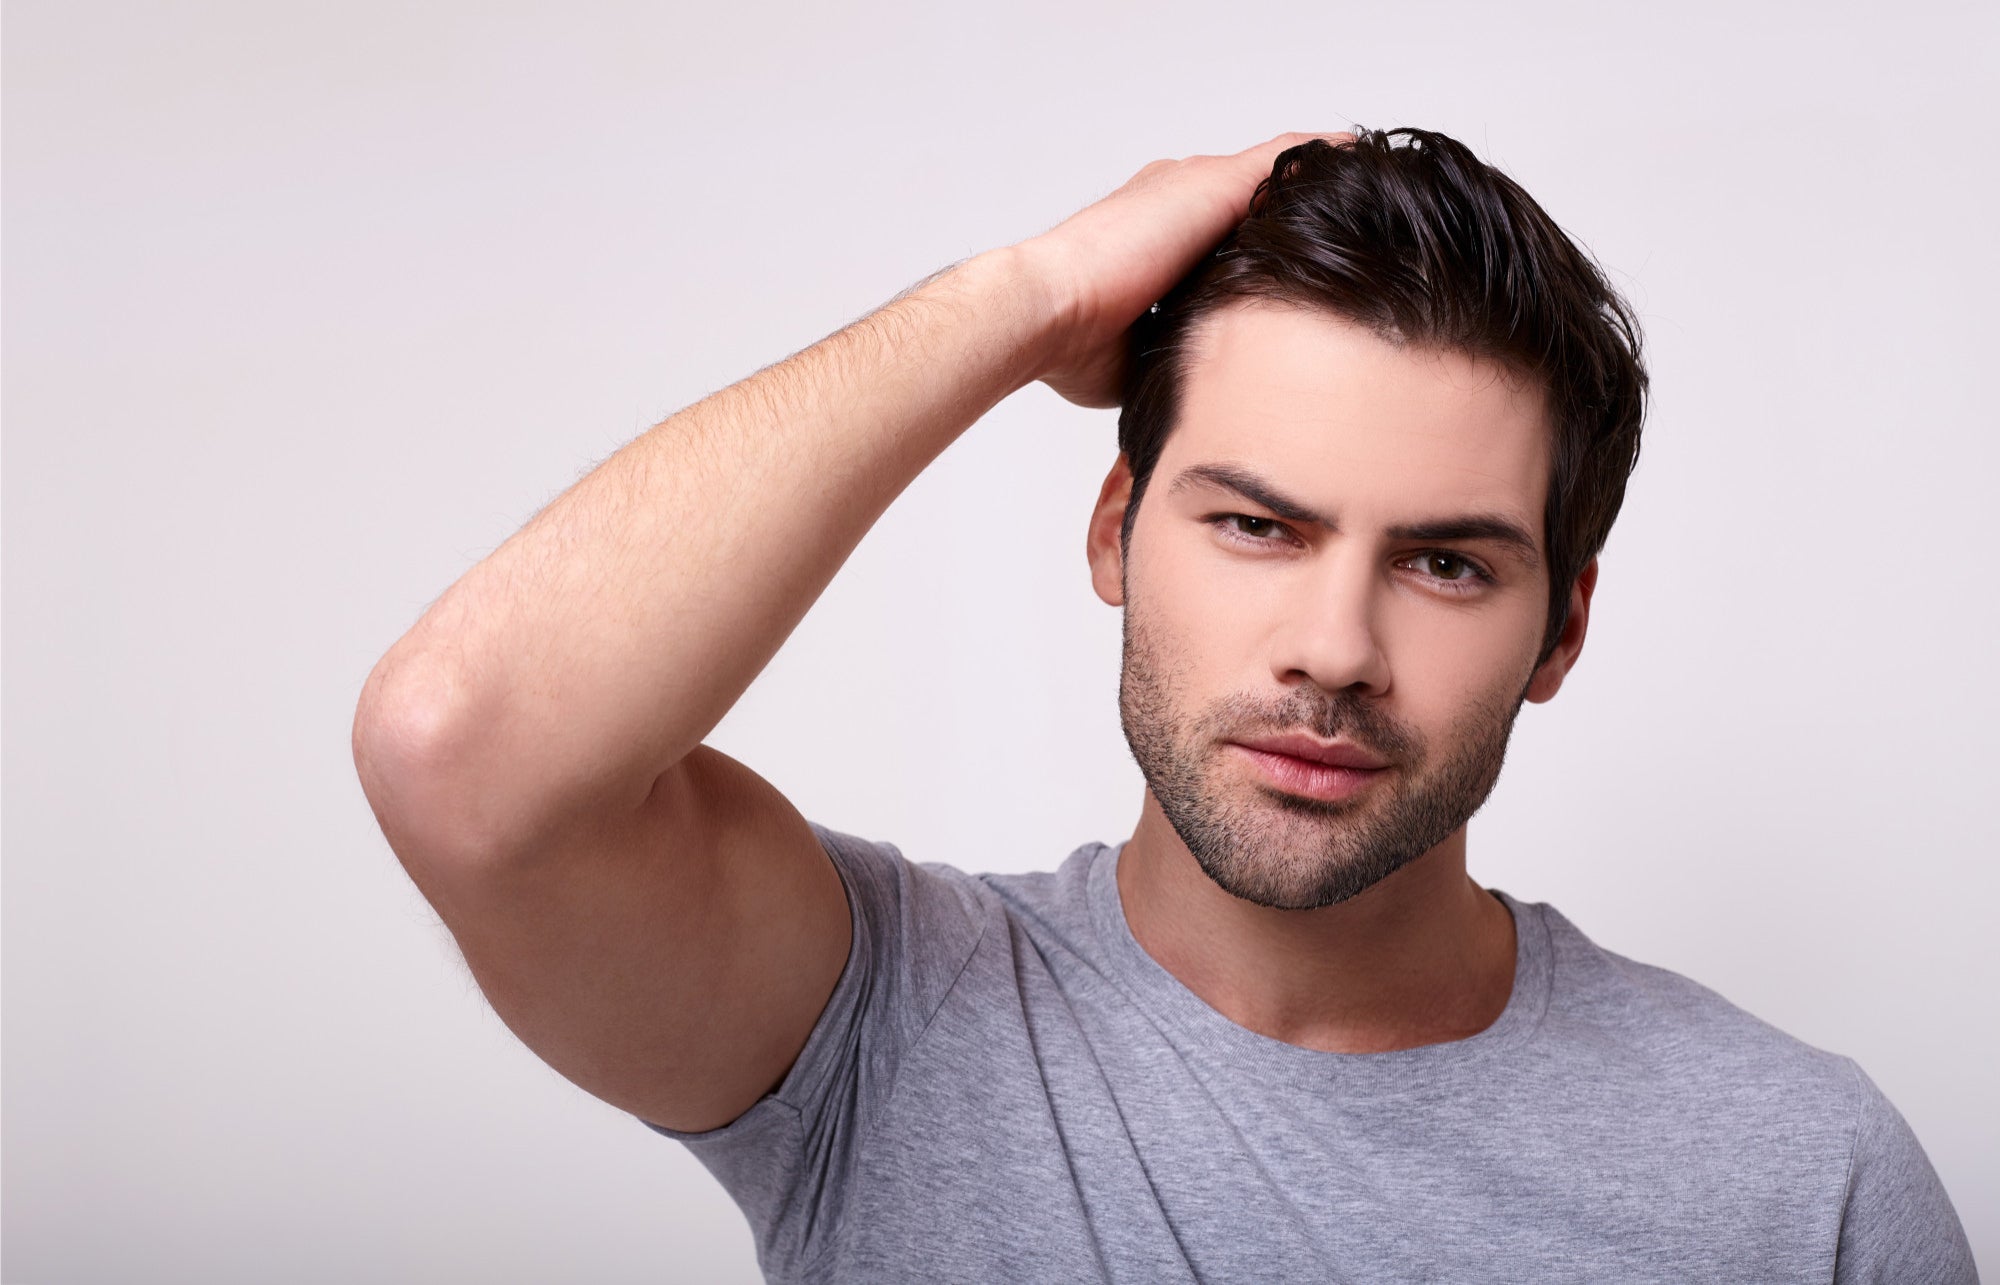 Optimal Hair Health: Lifestyle Changes, Nutrition & Supplements